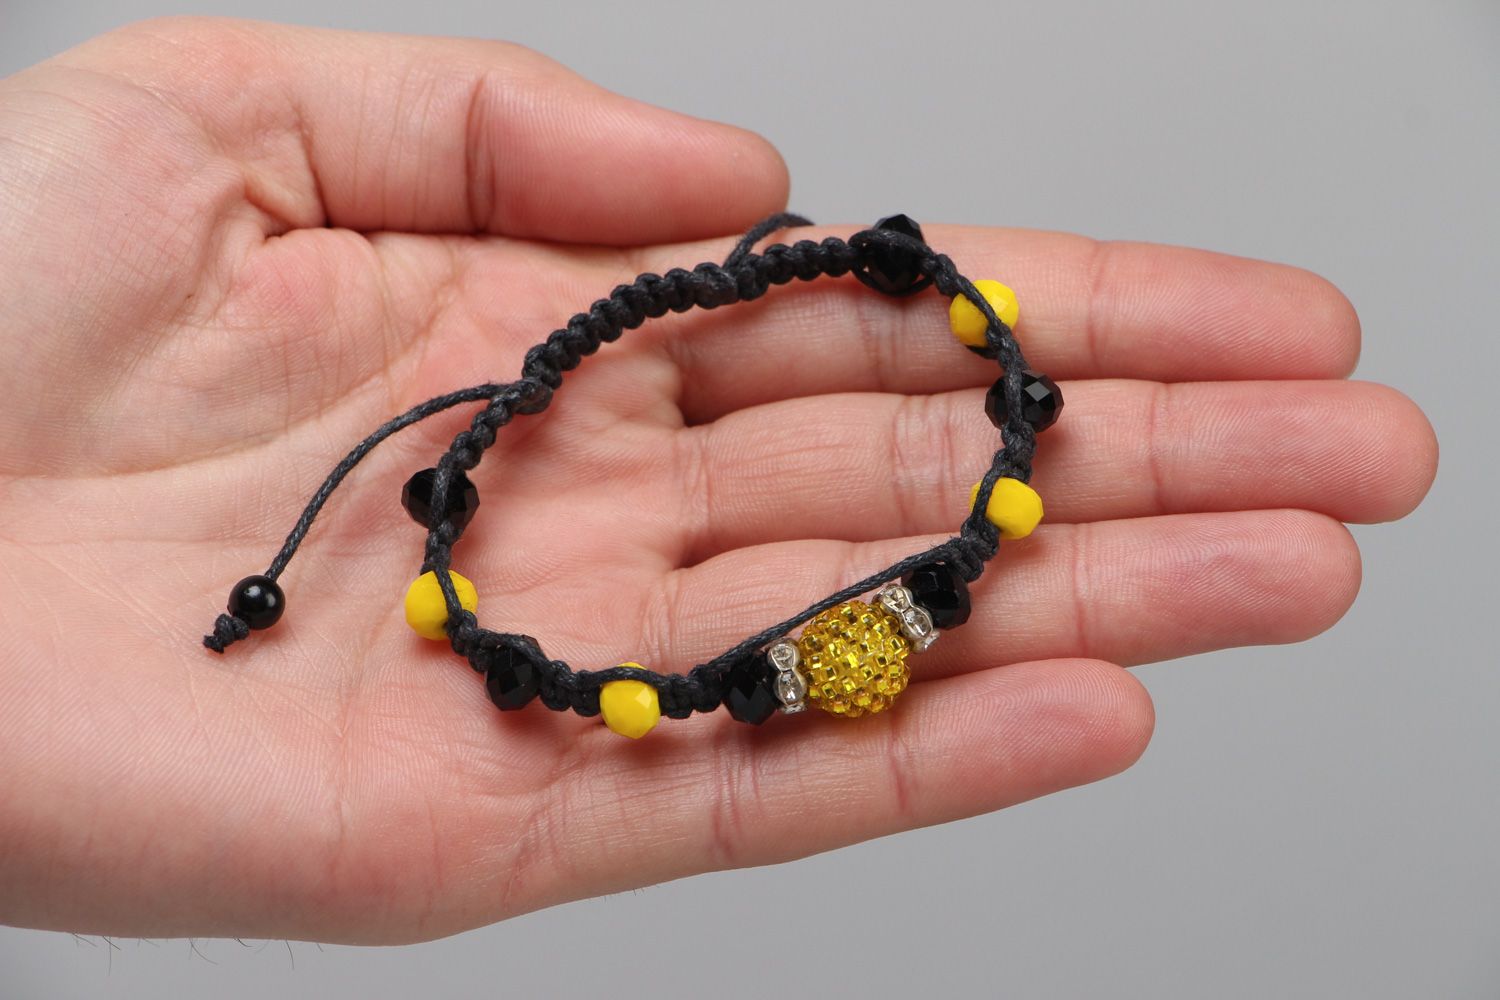 Handmade friendship bracelet woven of black cord and yellow beads for women photo 3